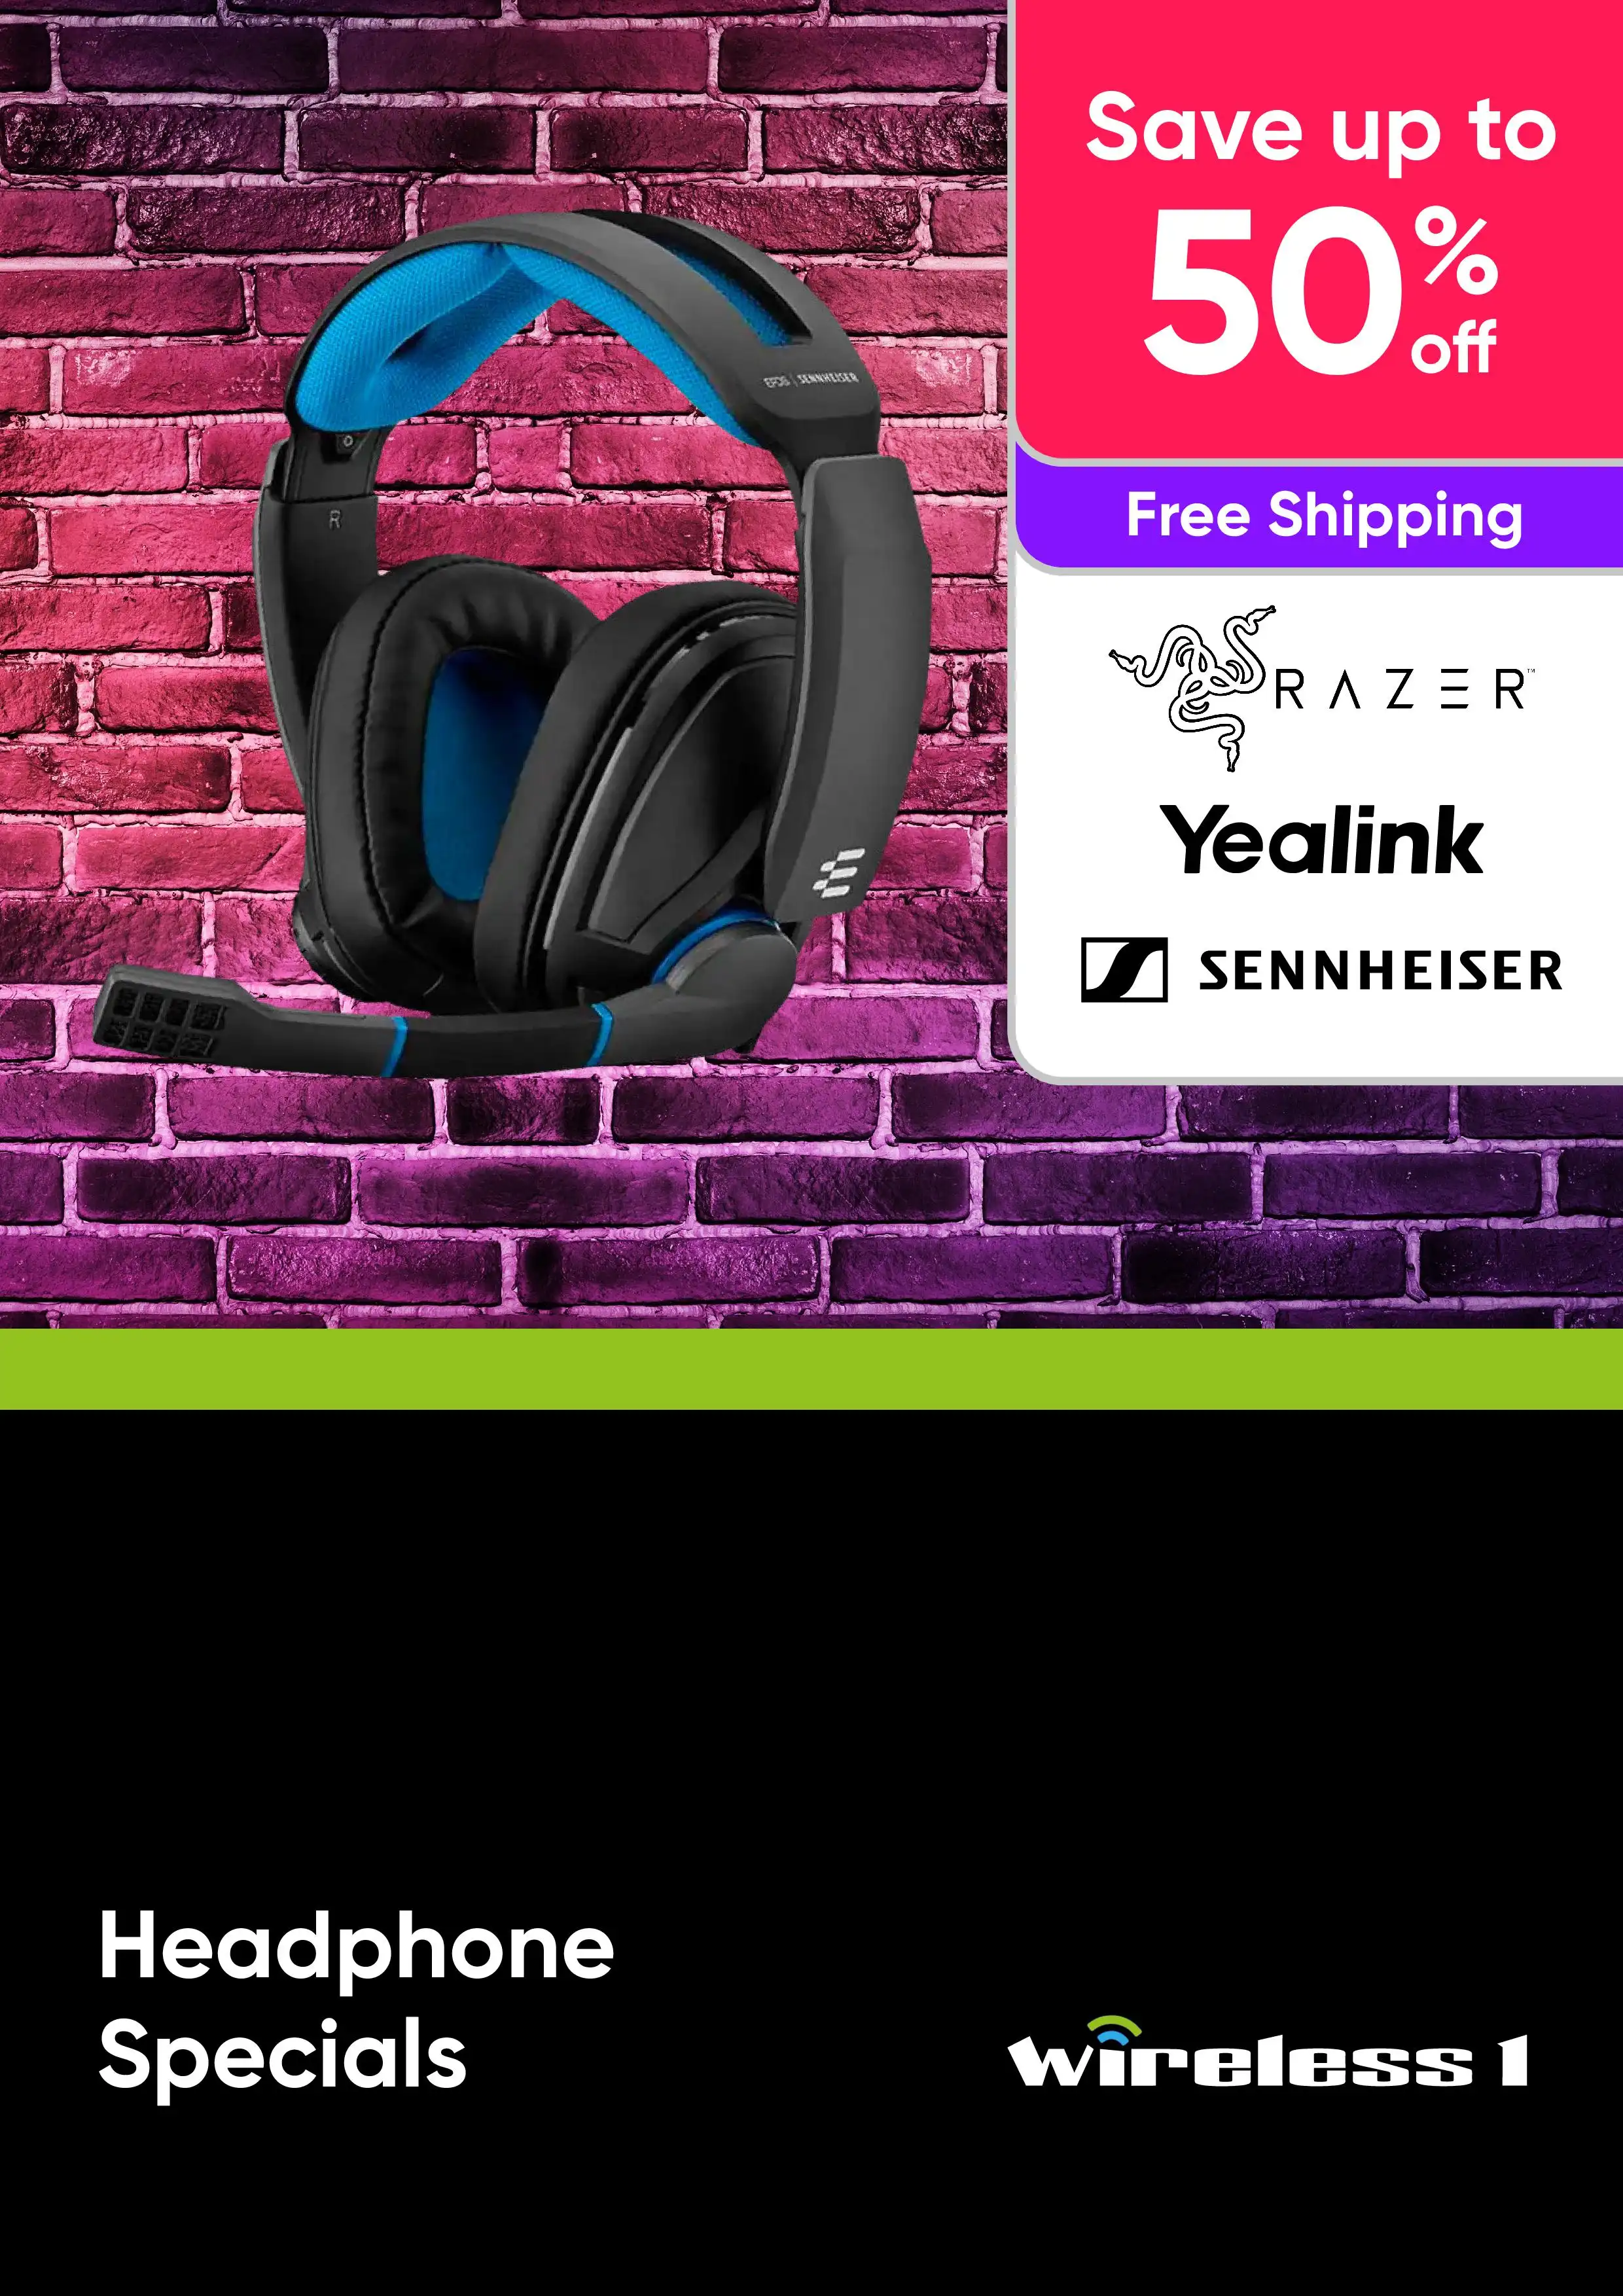 Headphones & Headsets up to 50% Off